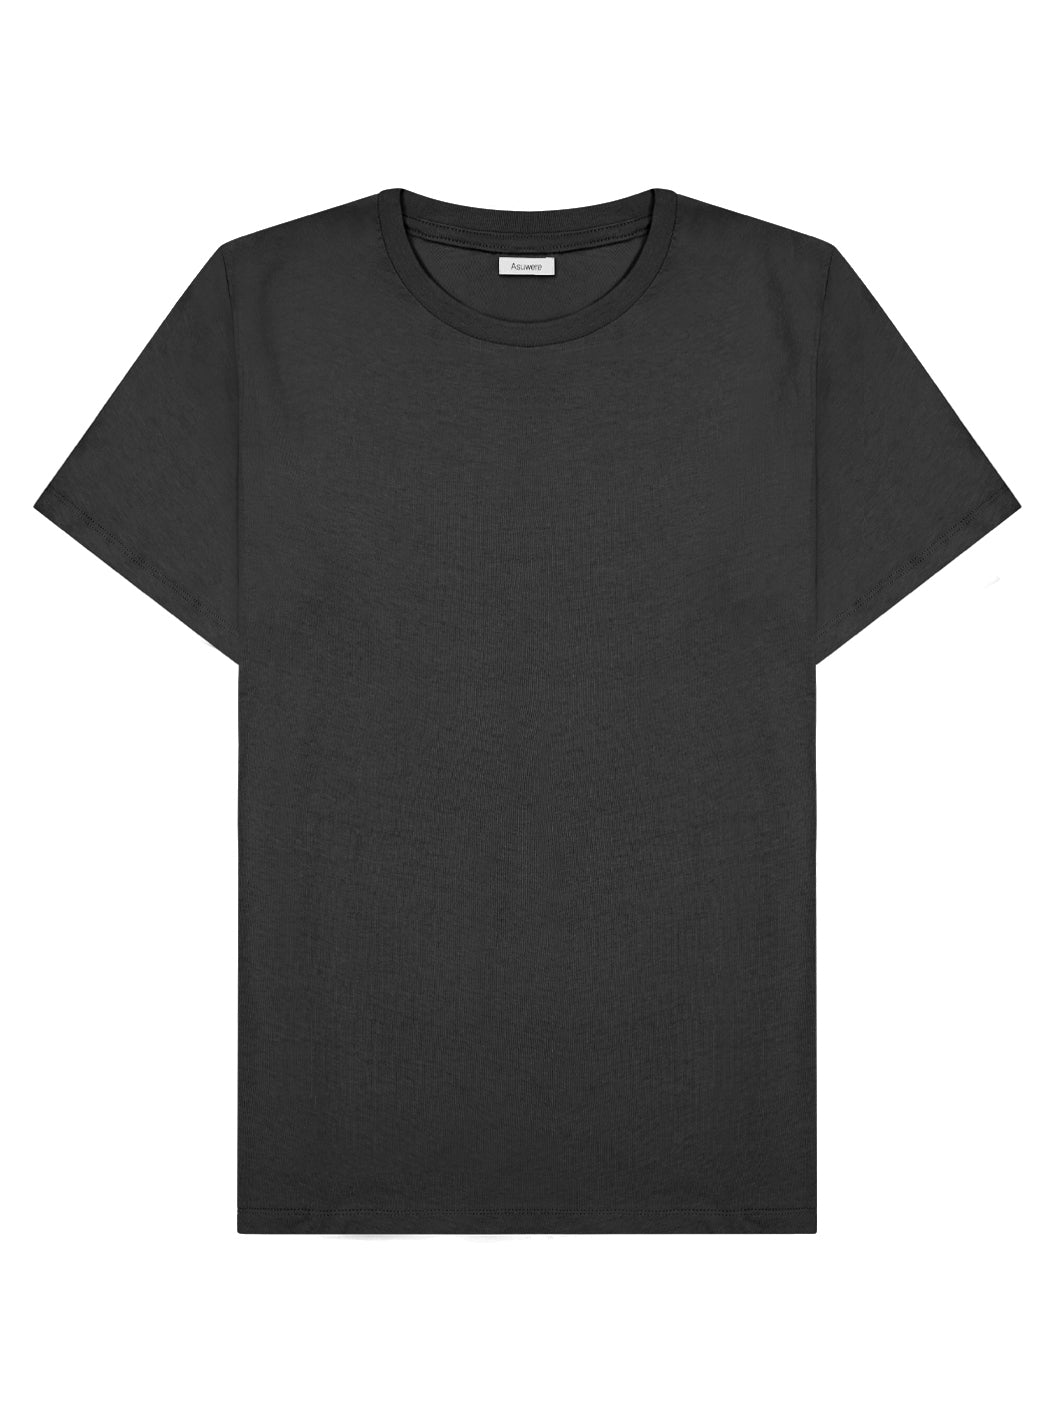 Front of Recycled Cotton Tee in Aged Black Asuwere